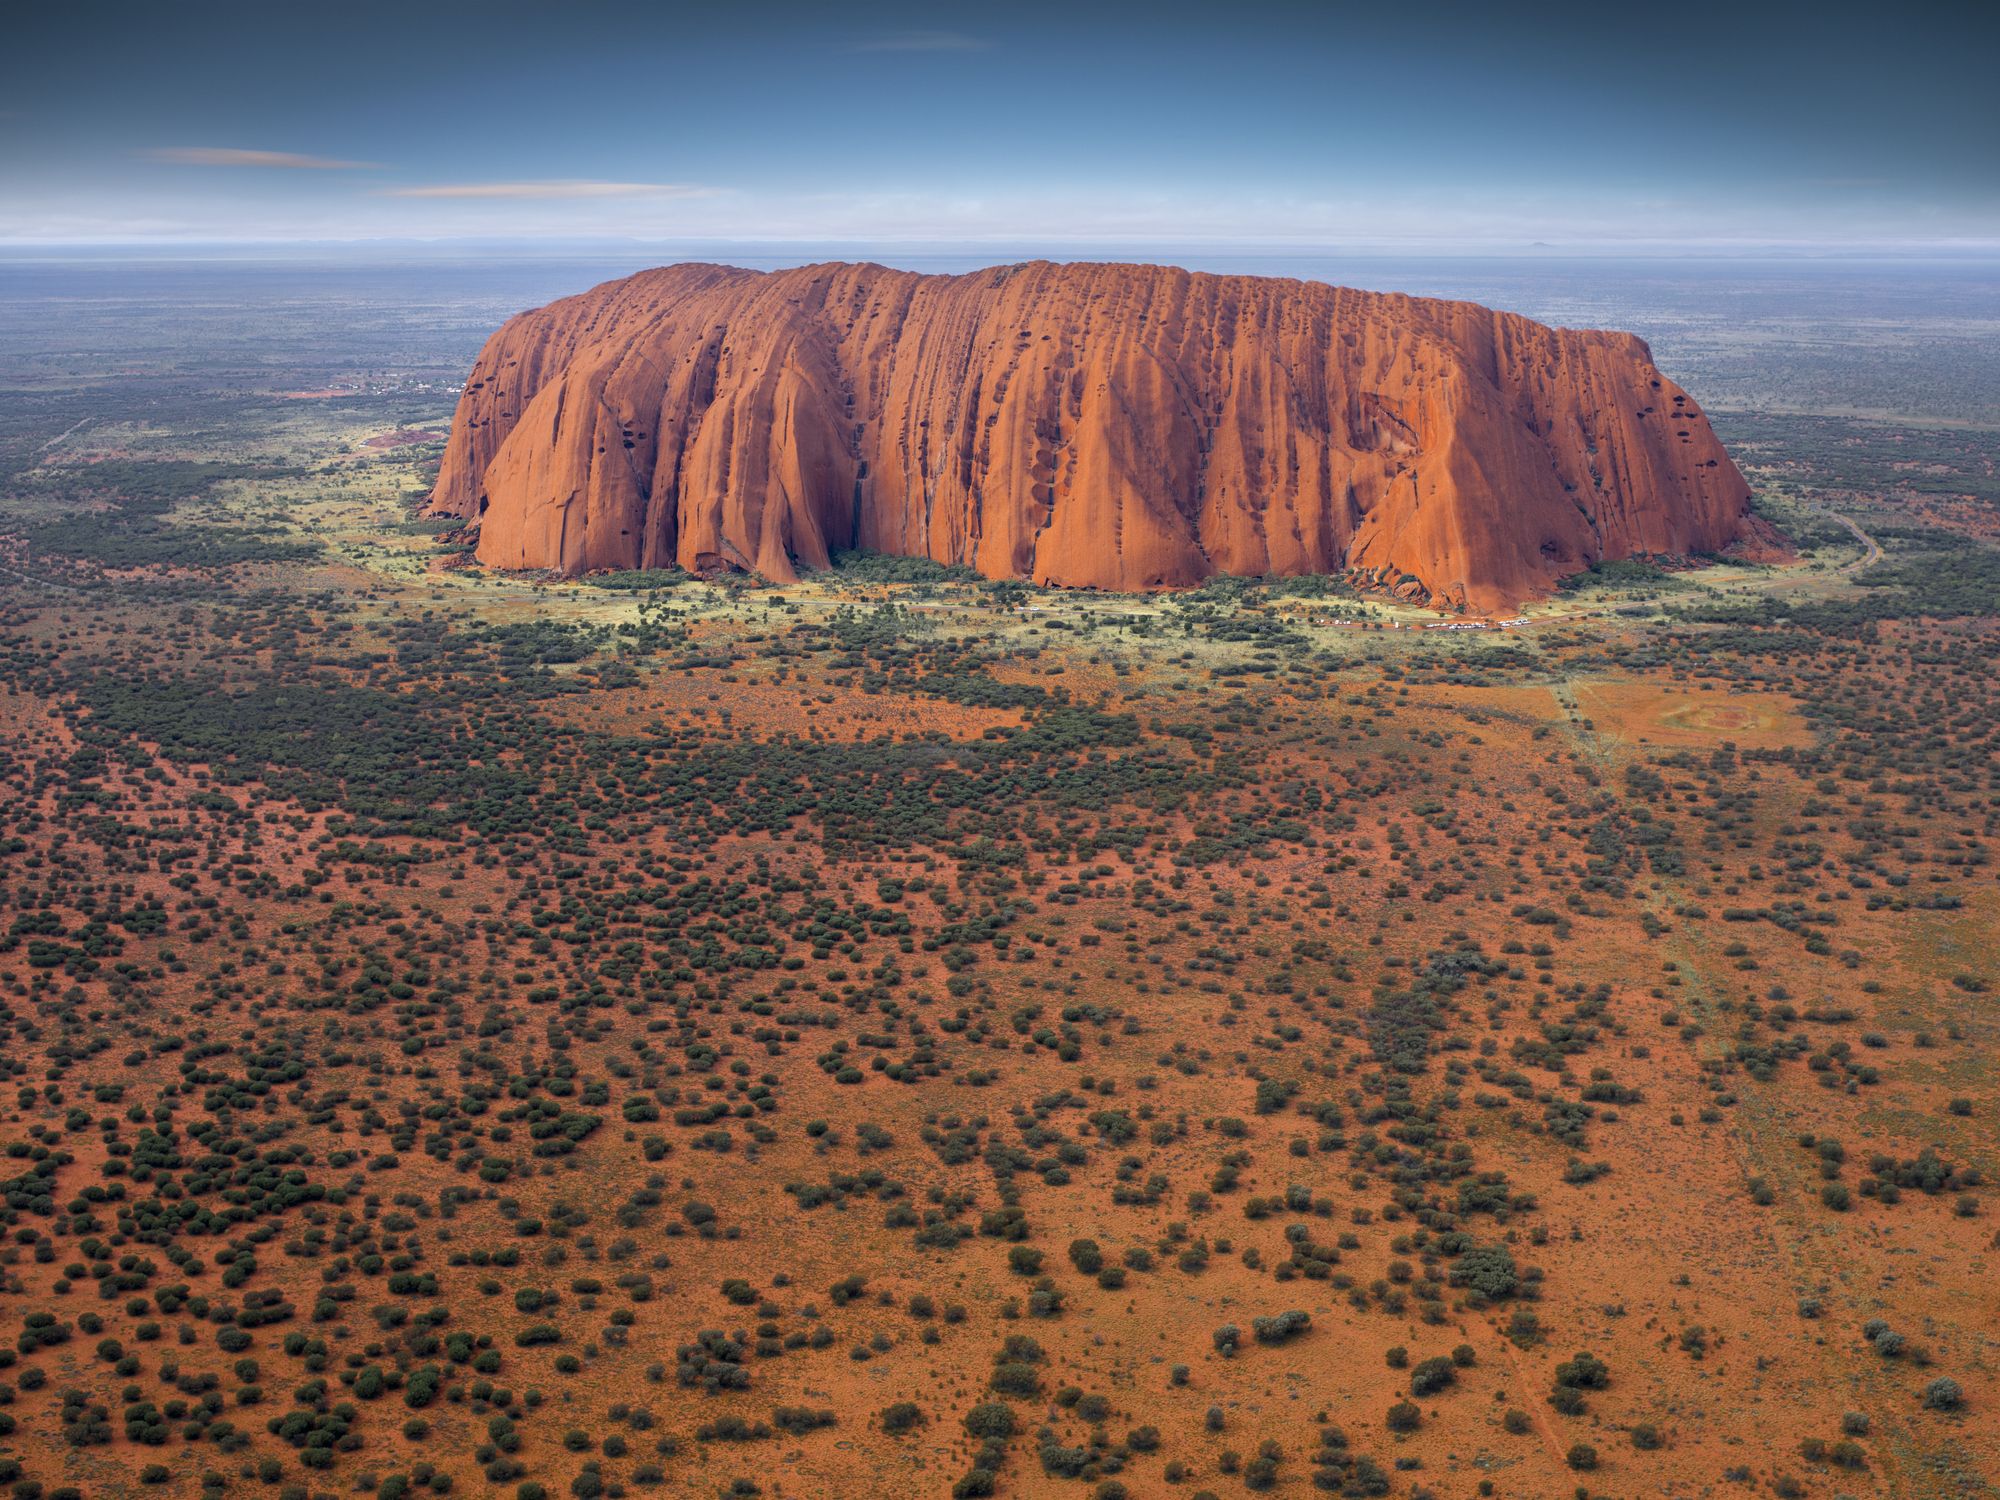 a large red rock formation with Uluru in the background